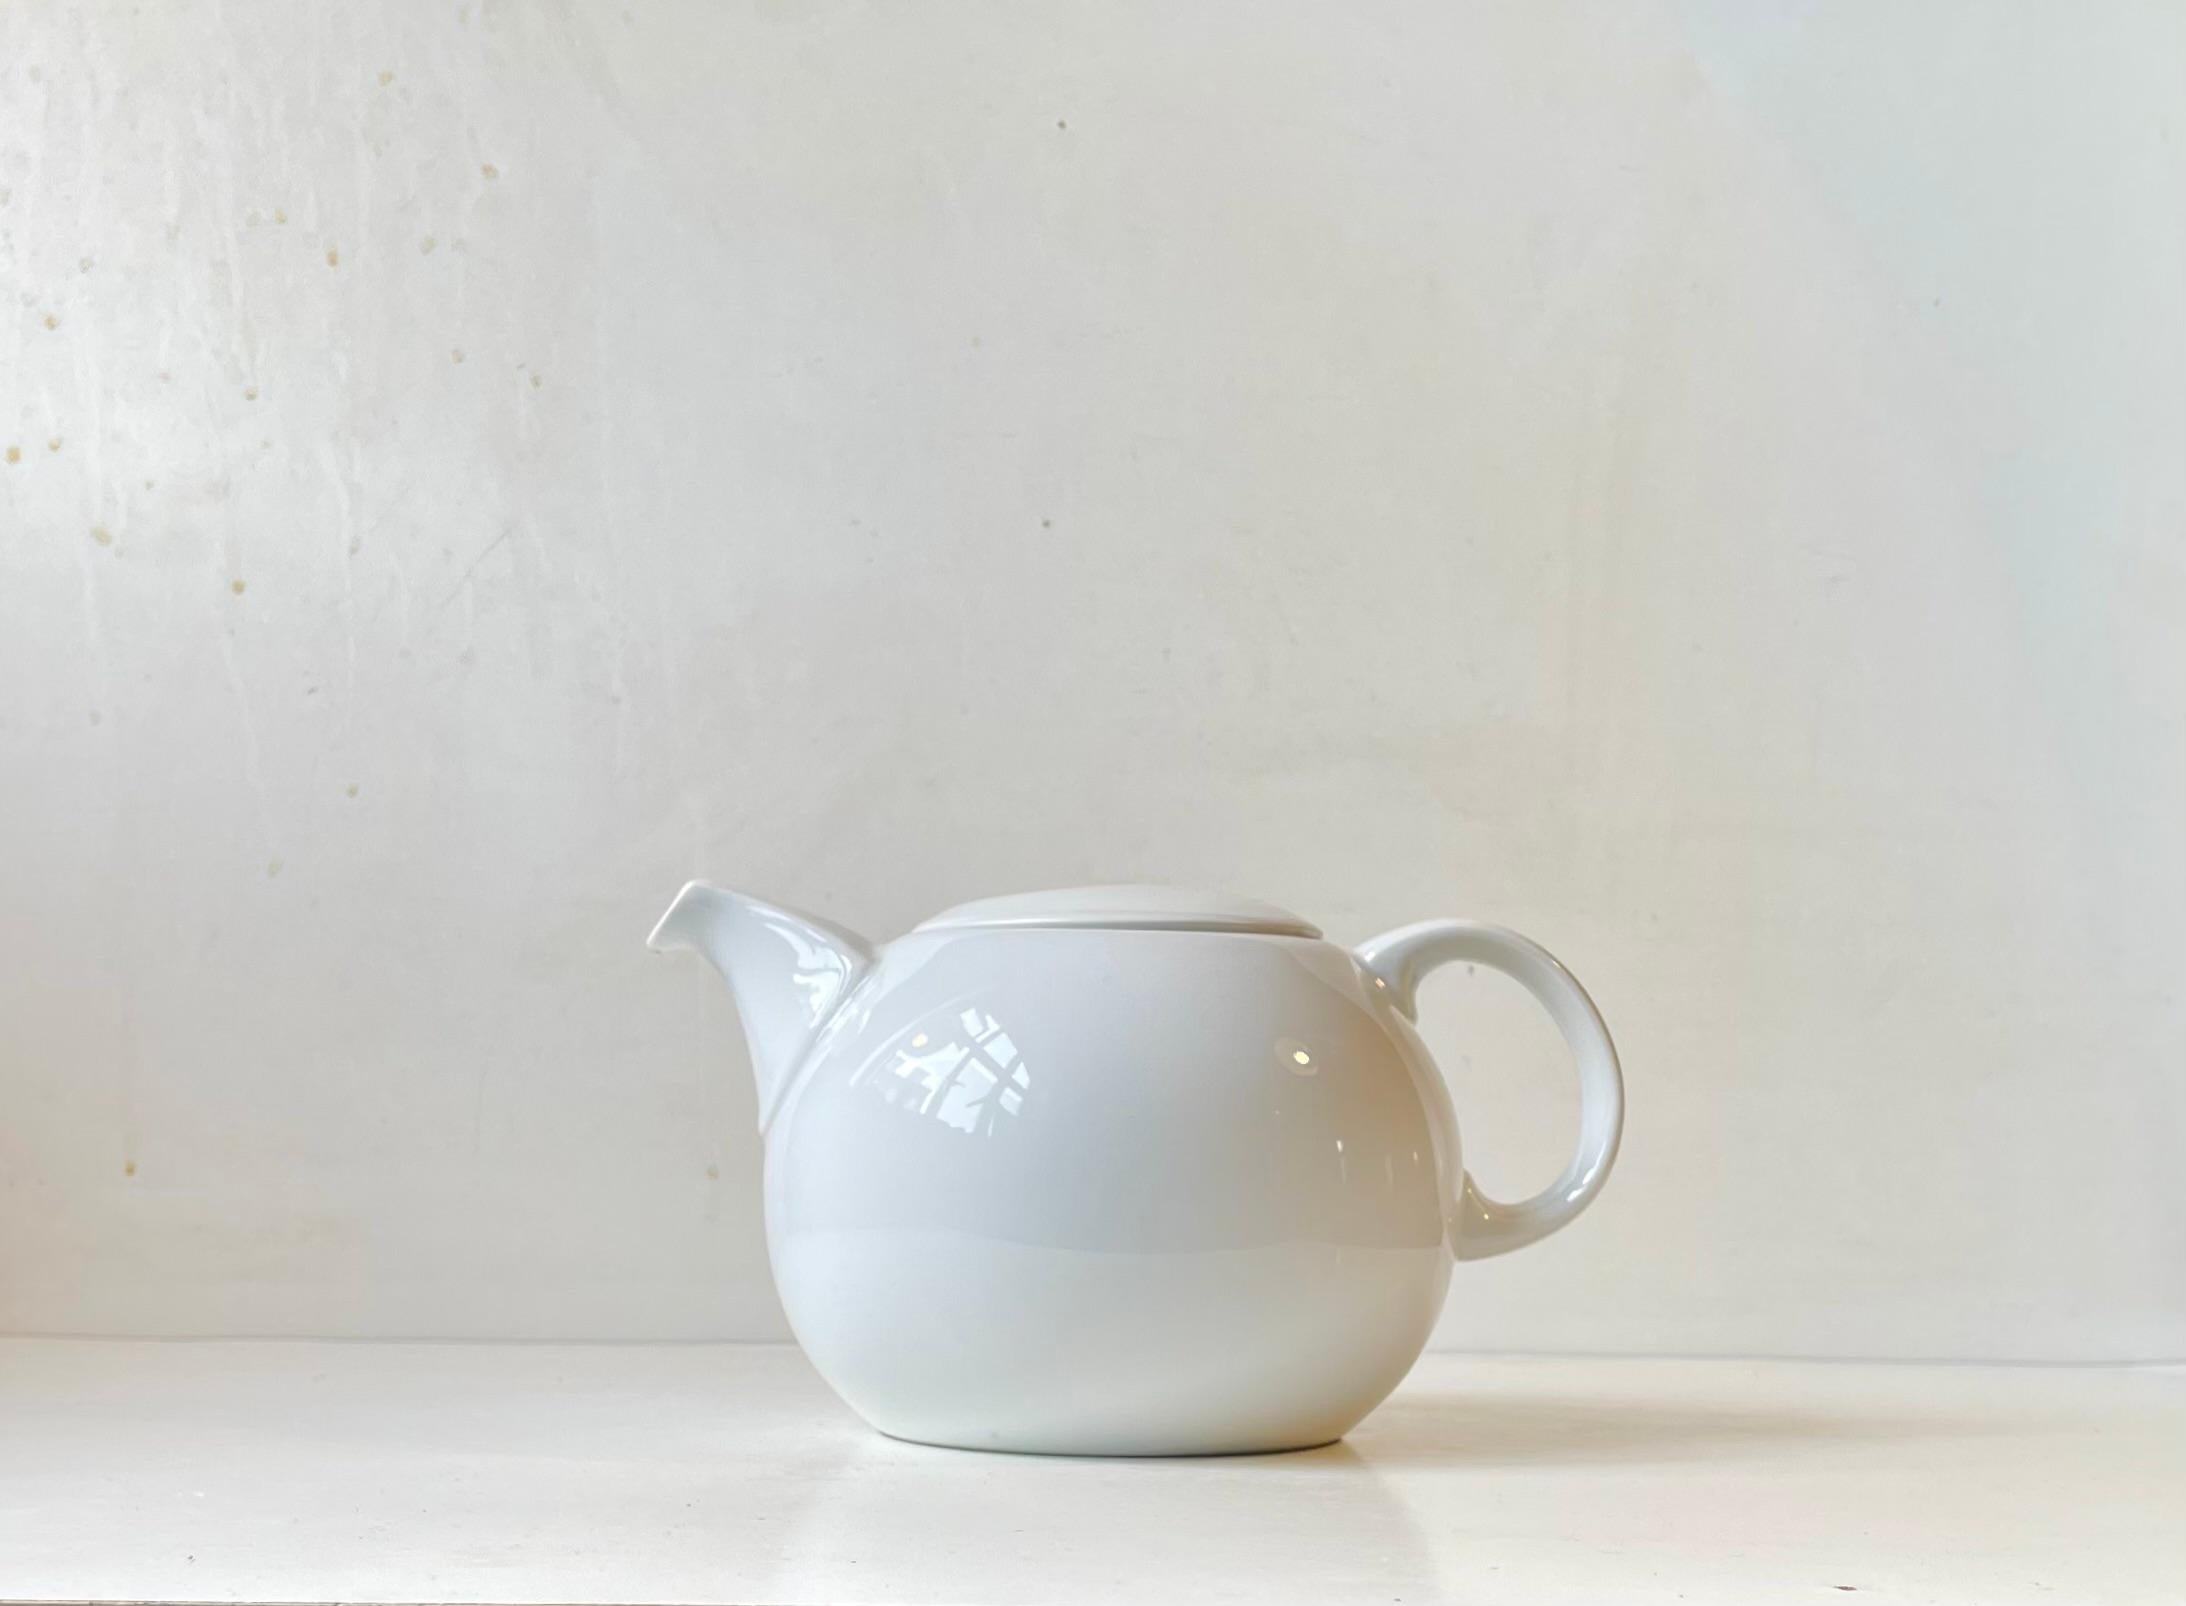 Scandinavian Modern teapot called Korinth and designed by Martin Hunt Corinth for Bing & Grøndahl - B&G and later Royal Copenhagen. Its very rare in this all-white configuration. Its made from white glazed porcelain and has a capacity of 1 liter.